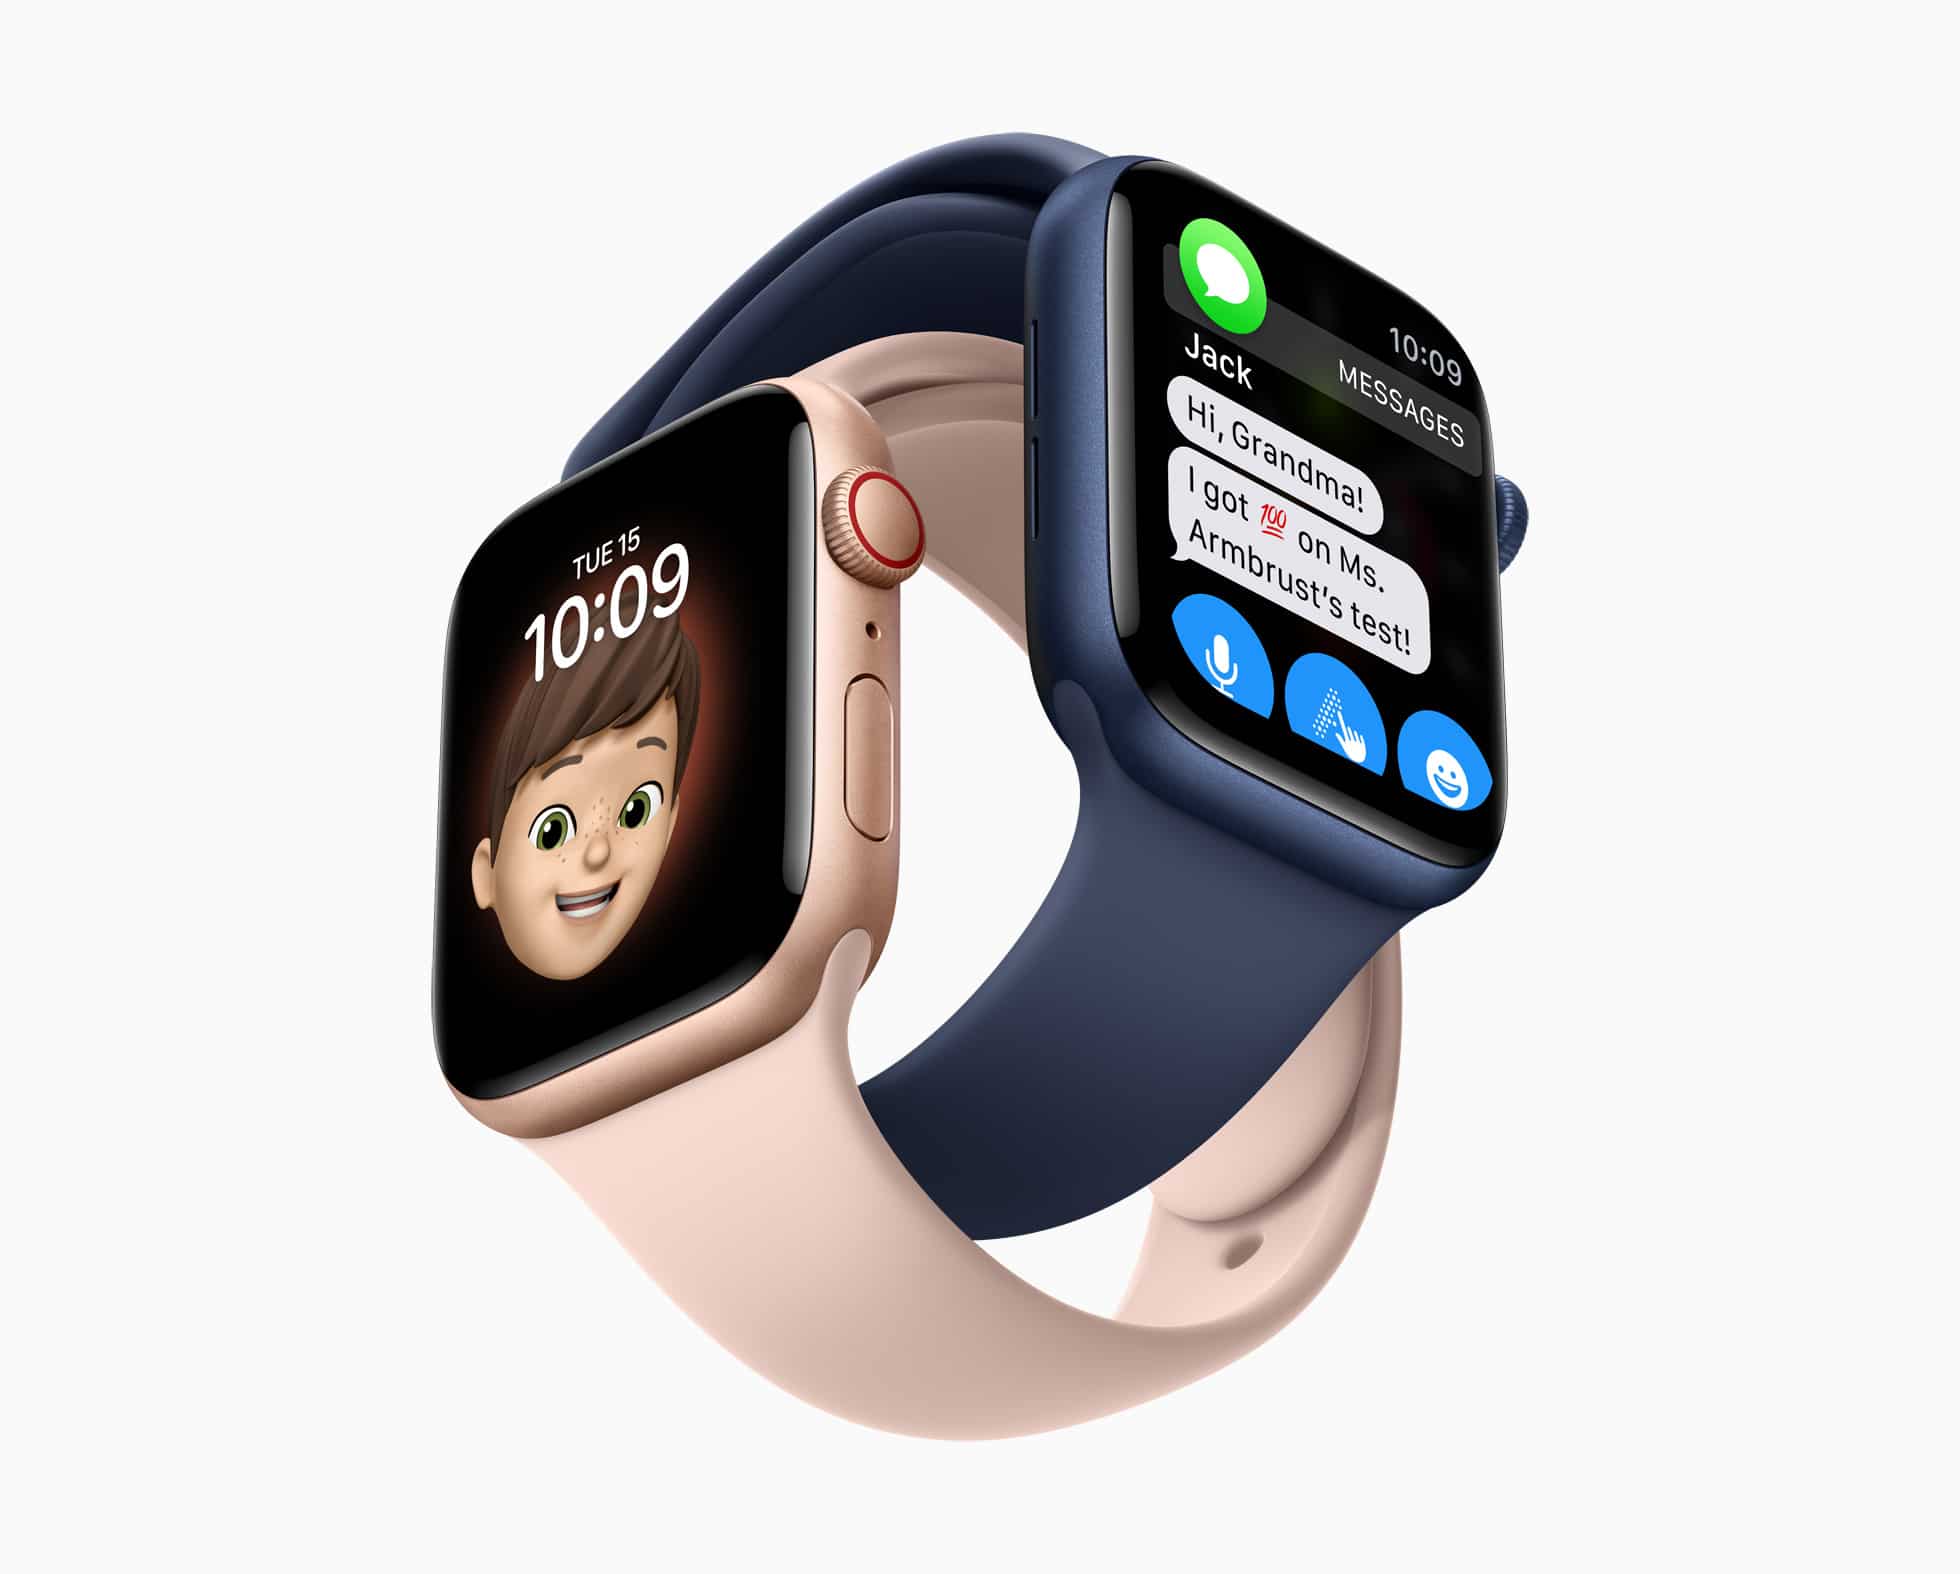 Apple Watch Series 6 features